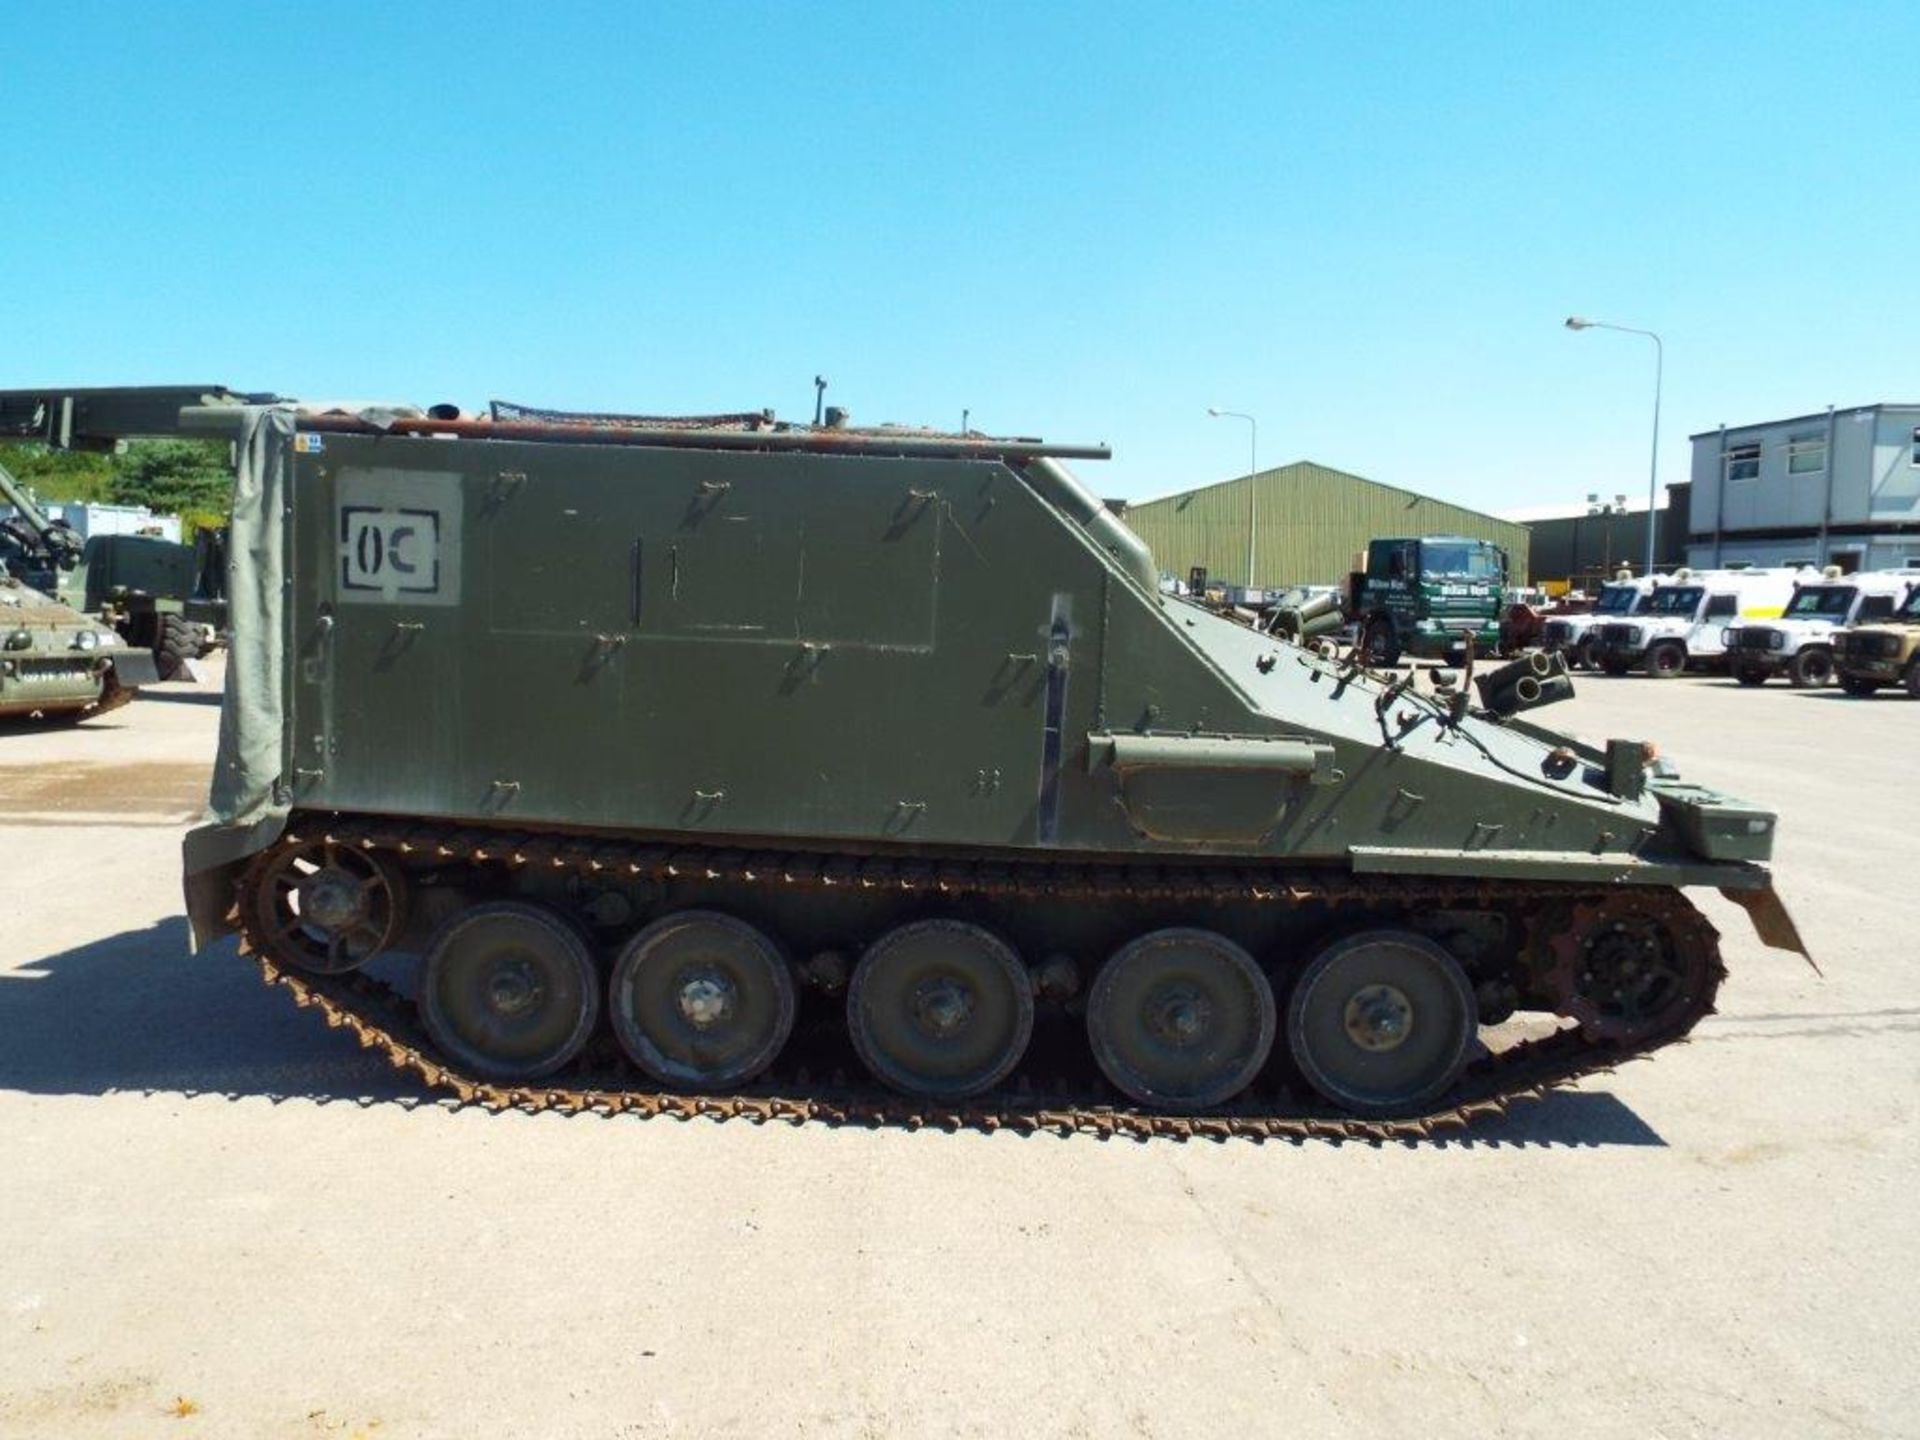 CVRT (Combat Vehicle Reconnaissance Tracked) FV105 Sultan Armoured Personnel Carrier - Image 8 of 28